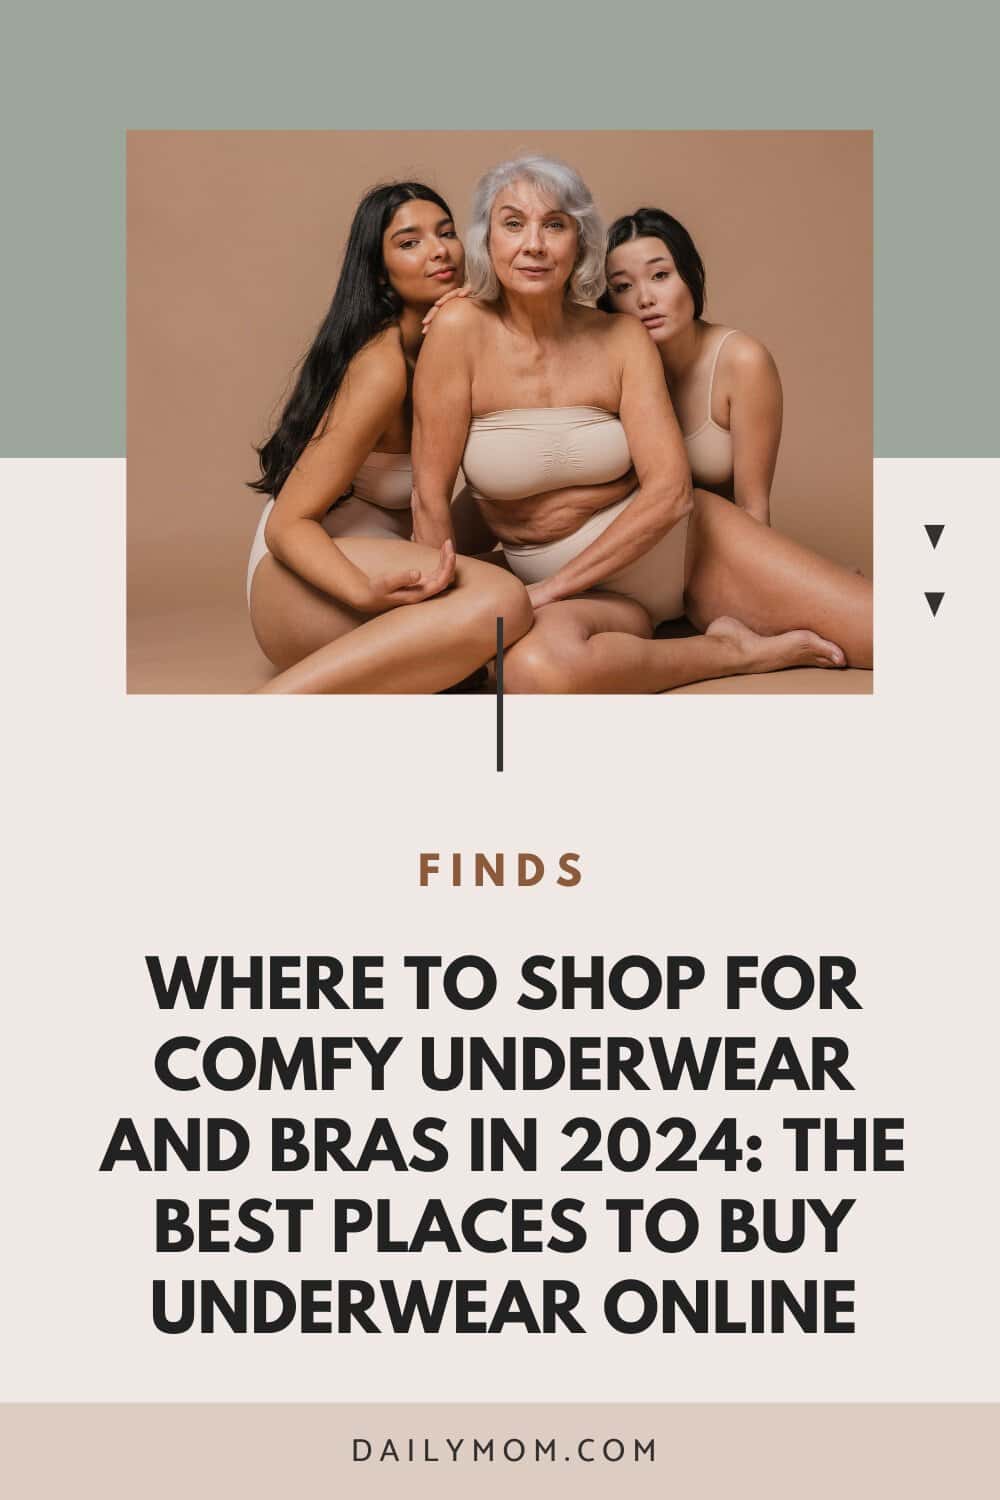 Where To Shop For Comfy Underwear And Bras In 2024: The Best Places To Buy Underwear Online 49 Daily Mom, Magazine For Families